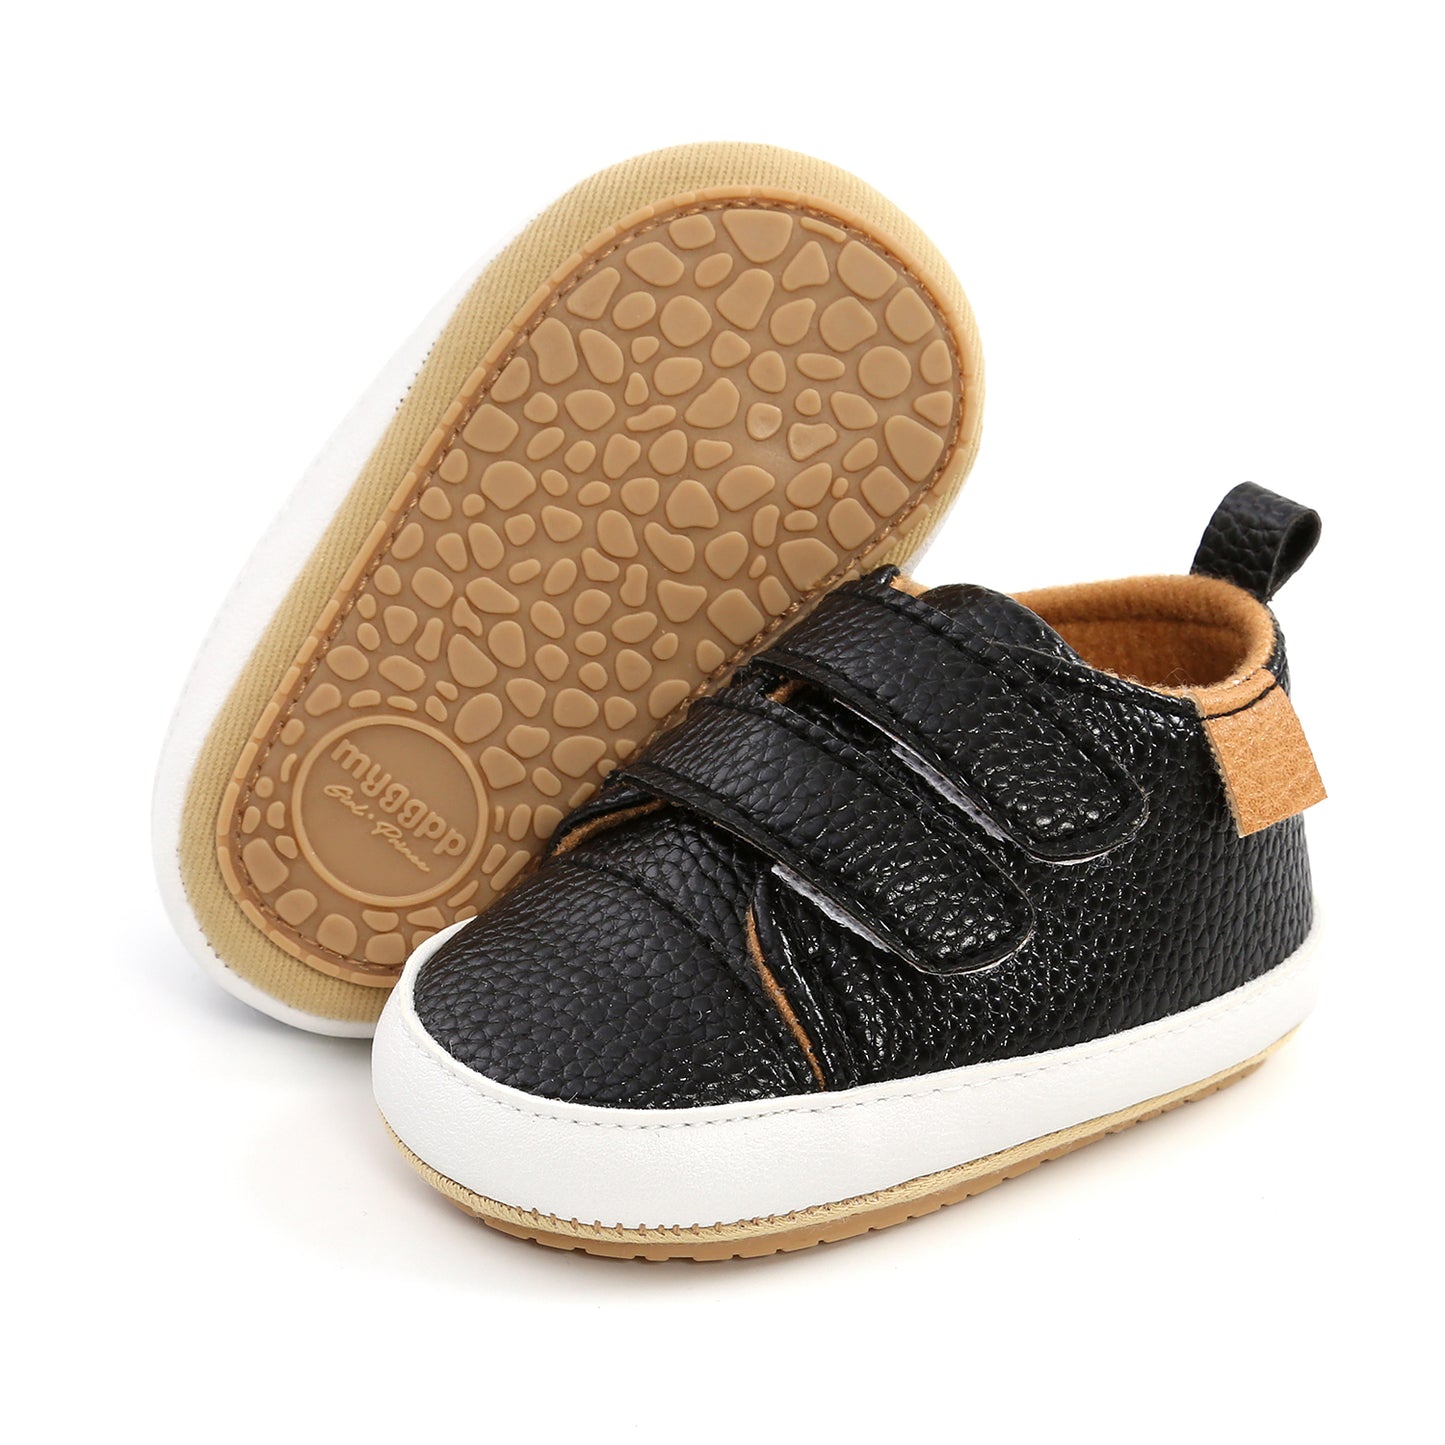 Non-Slip High-Top PU Leather Walking Shoes for Baby Boys and Girls